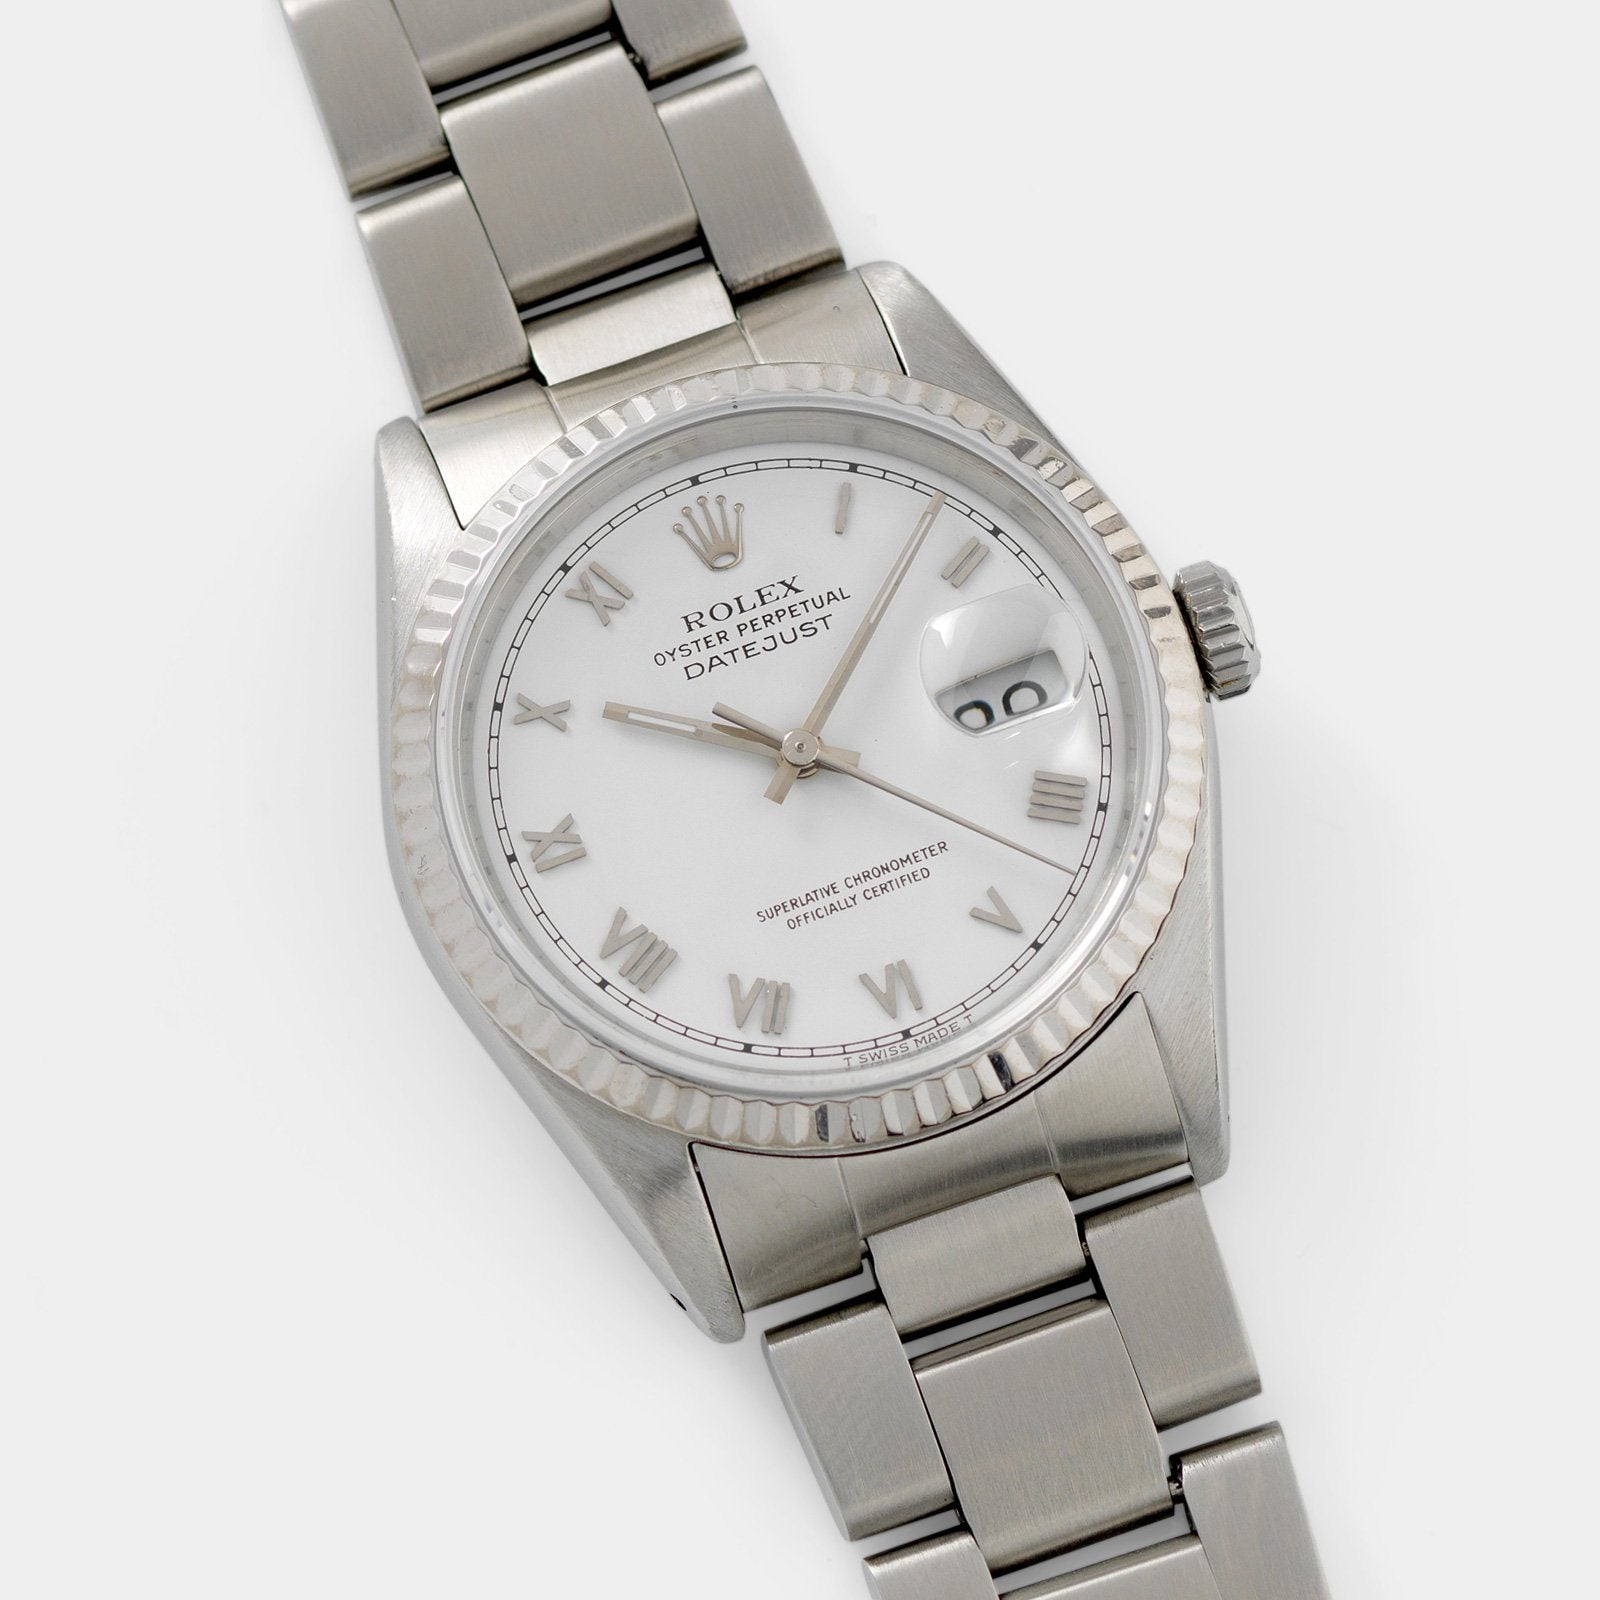 Rolex Datejust White Porcelain Dial Reference 16234